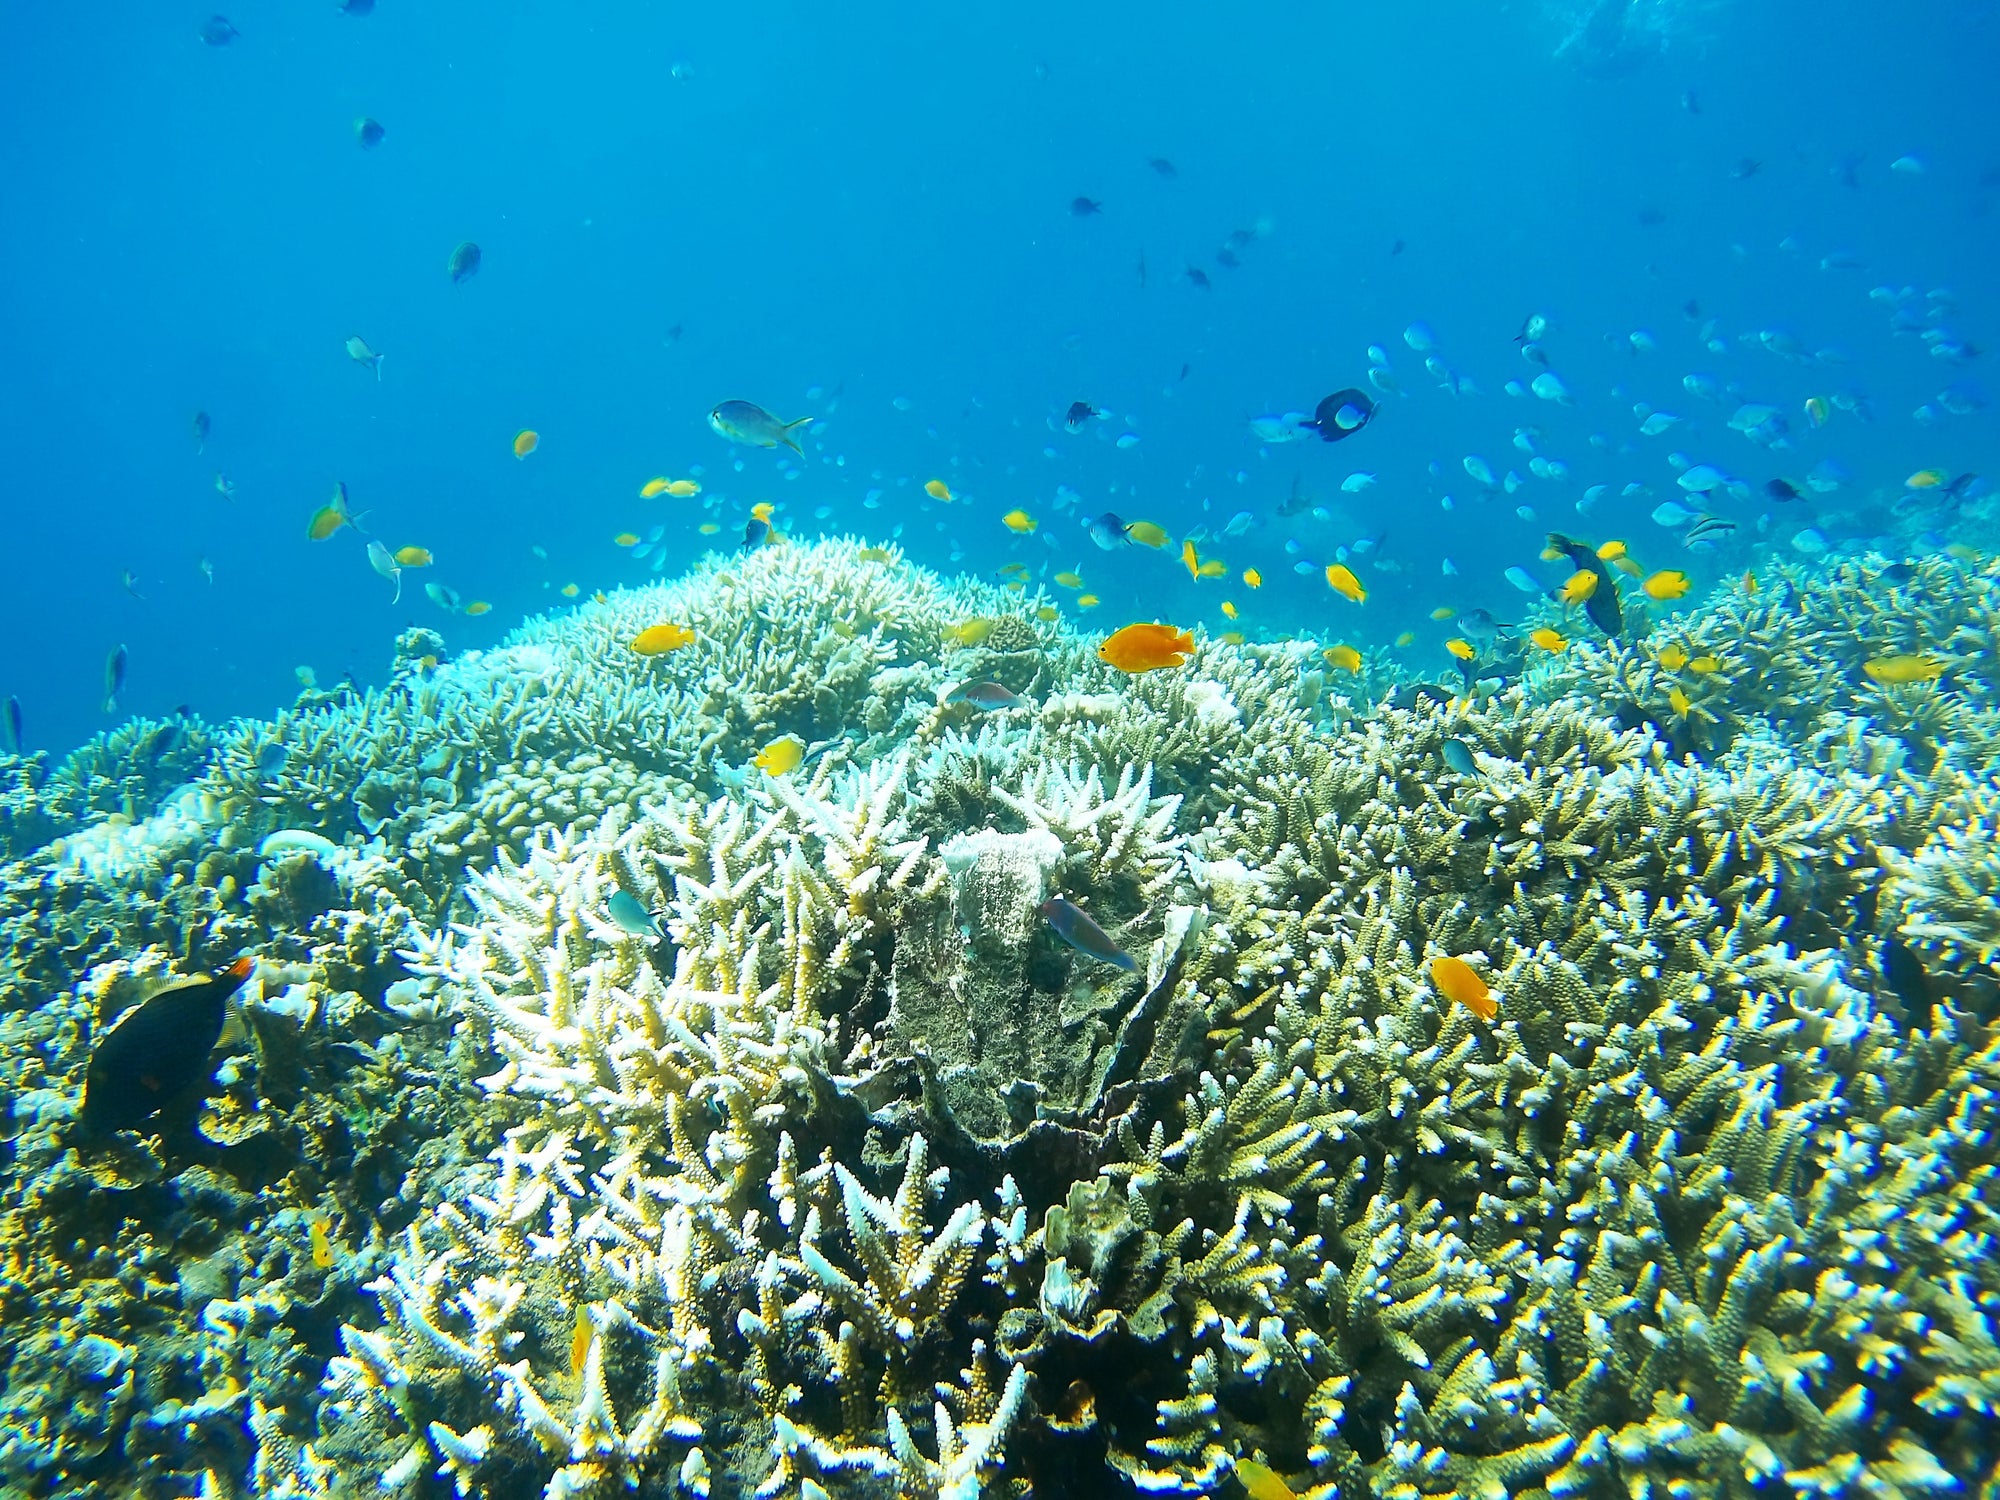 The once brightly hued coral has turned a pale grey due to coral bleaching caused by high temperatures